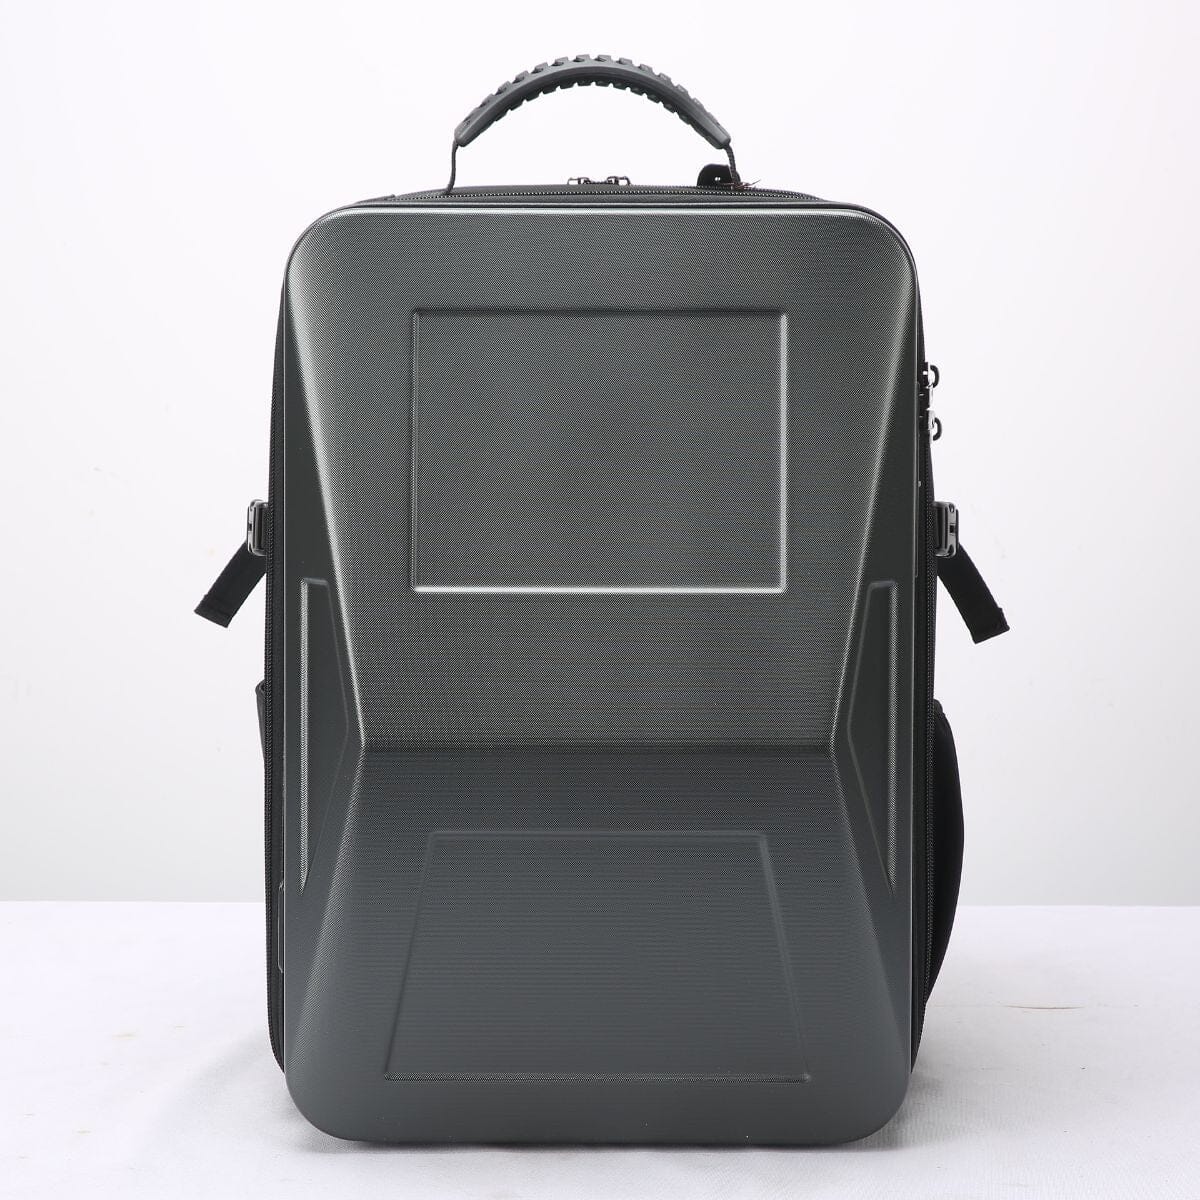 Protect Your Gear with our Anti-Theft Camera Backpack | CyberBackpack (Ships Mid November) Cyberbackpack Steel Gray 